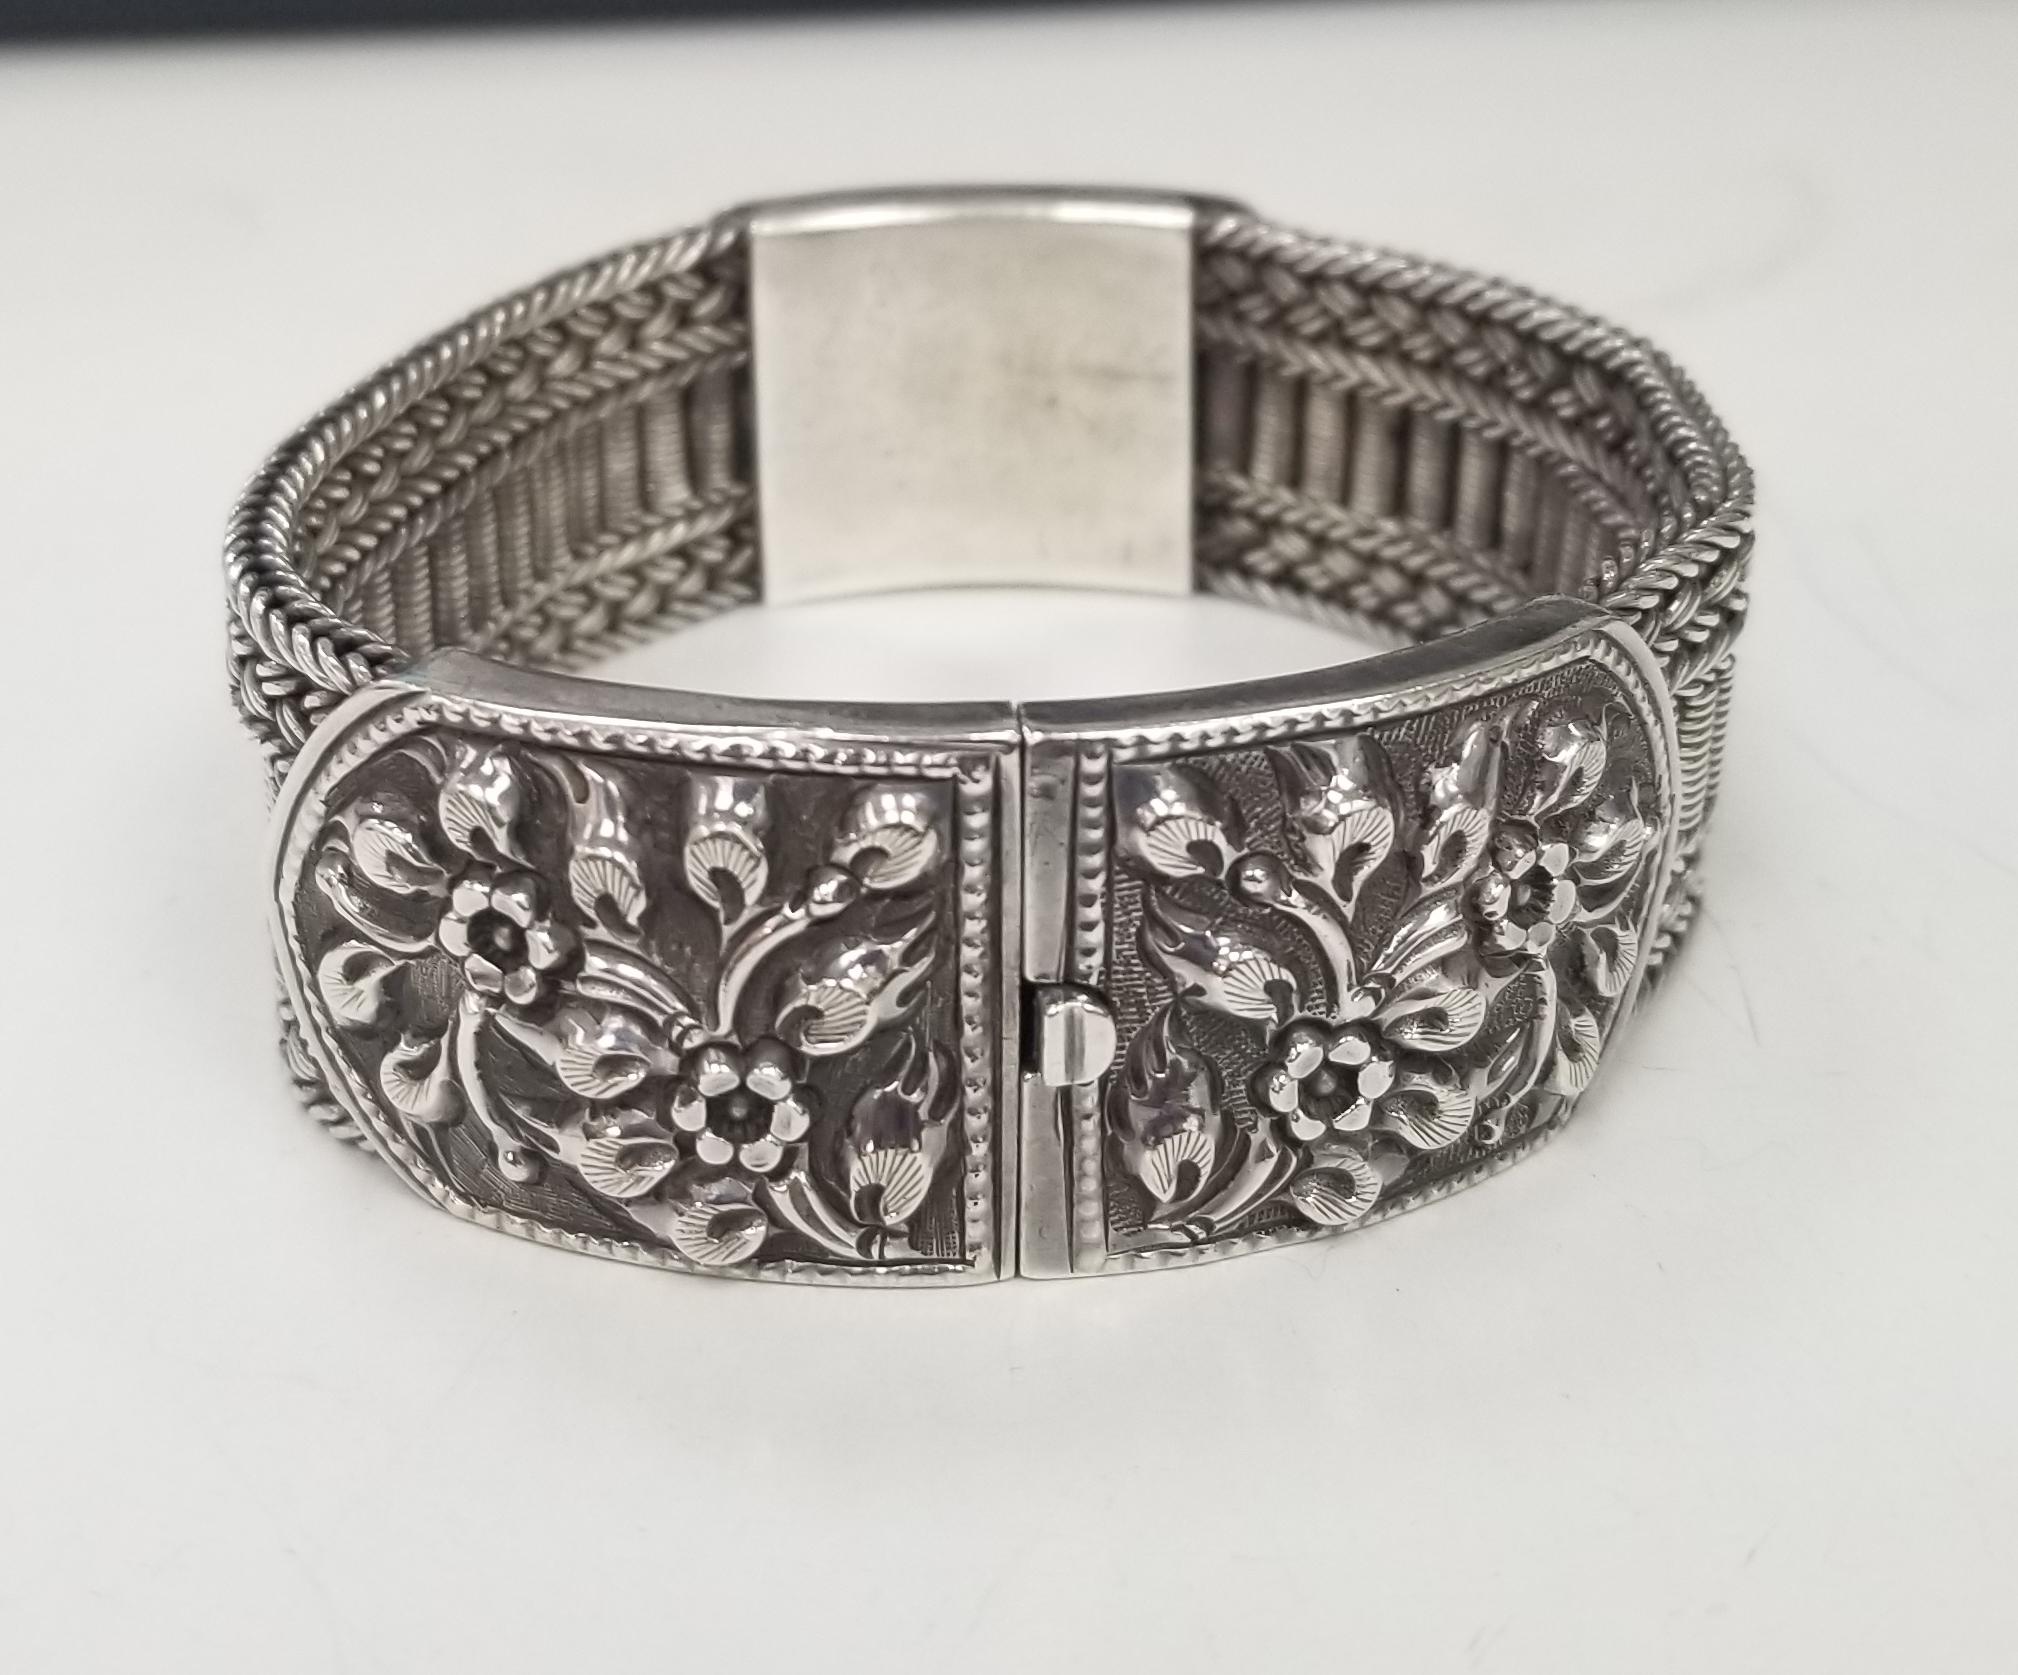 Silver 3 row mesh bracelet with flower motif center and on clasp
22mm wide and 6mm thick, very strong in very good condition.
Weight: 82.86 grams 